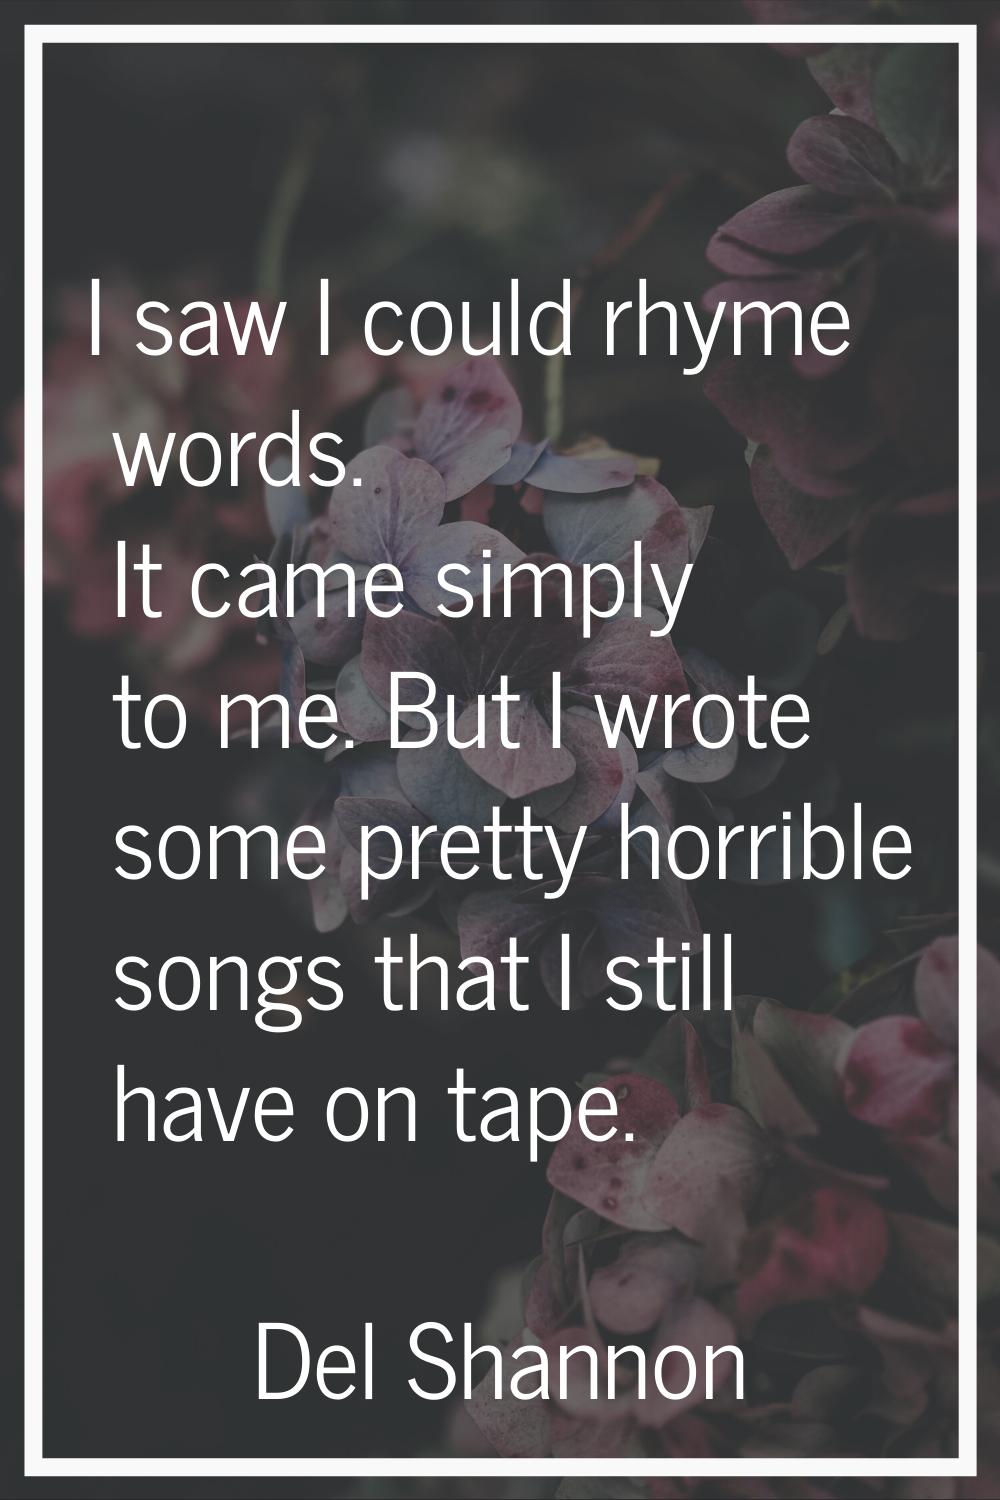 I saw I could rhyme words. It came simply to me. But I wrote some pretty horrible songs that I stil